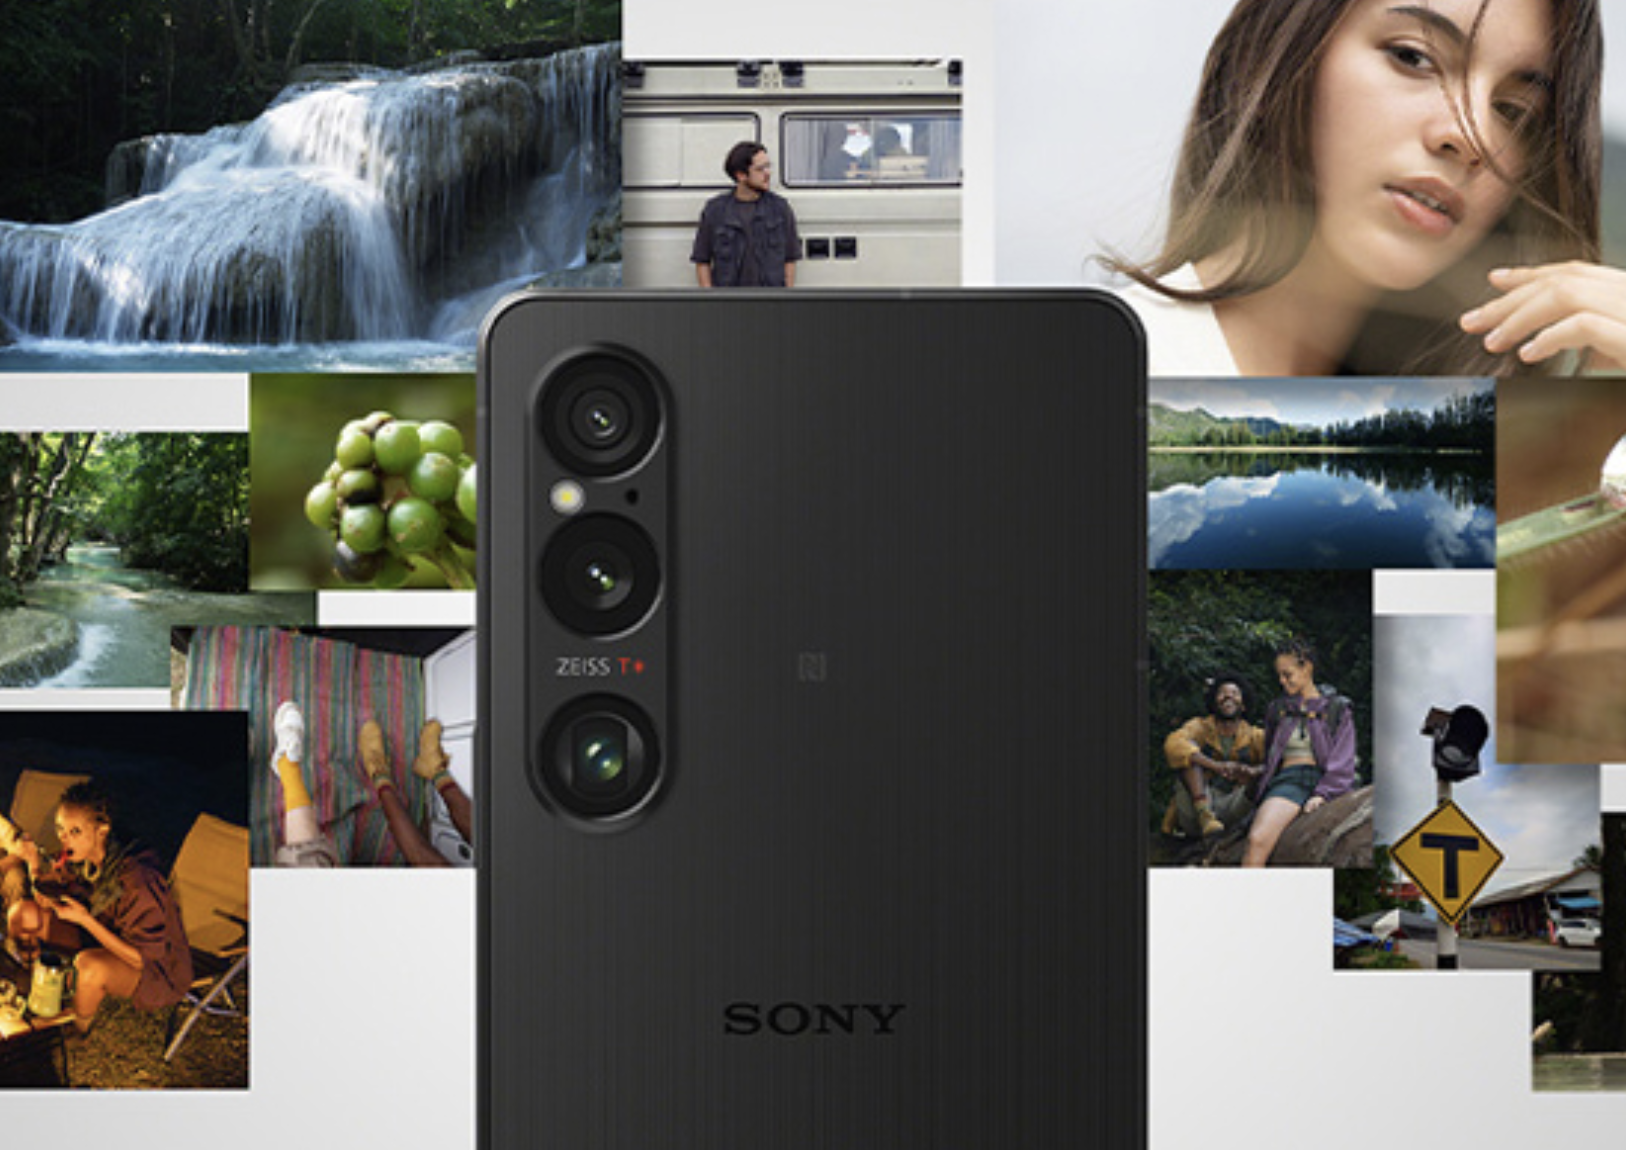 Sony Confirms Product Launch for May 15